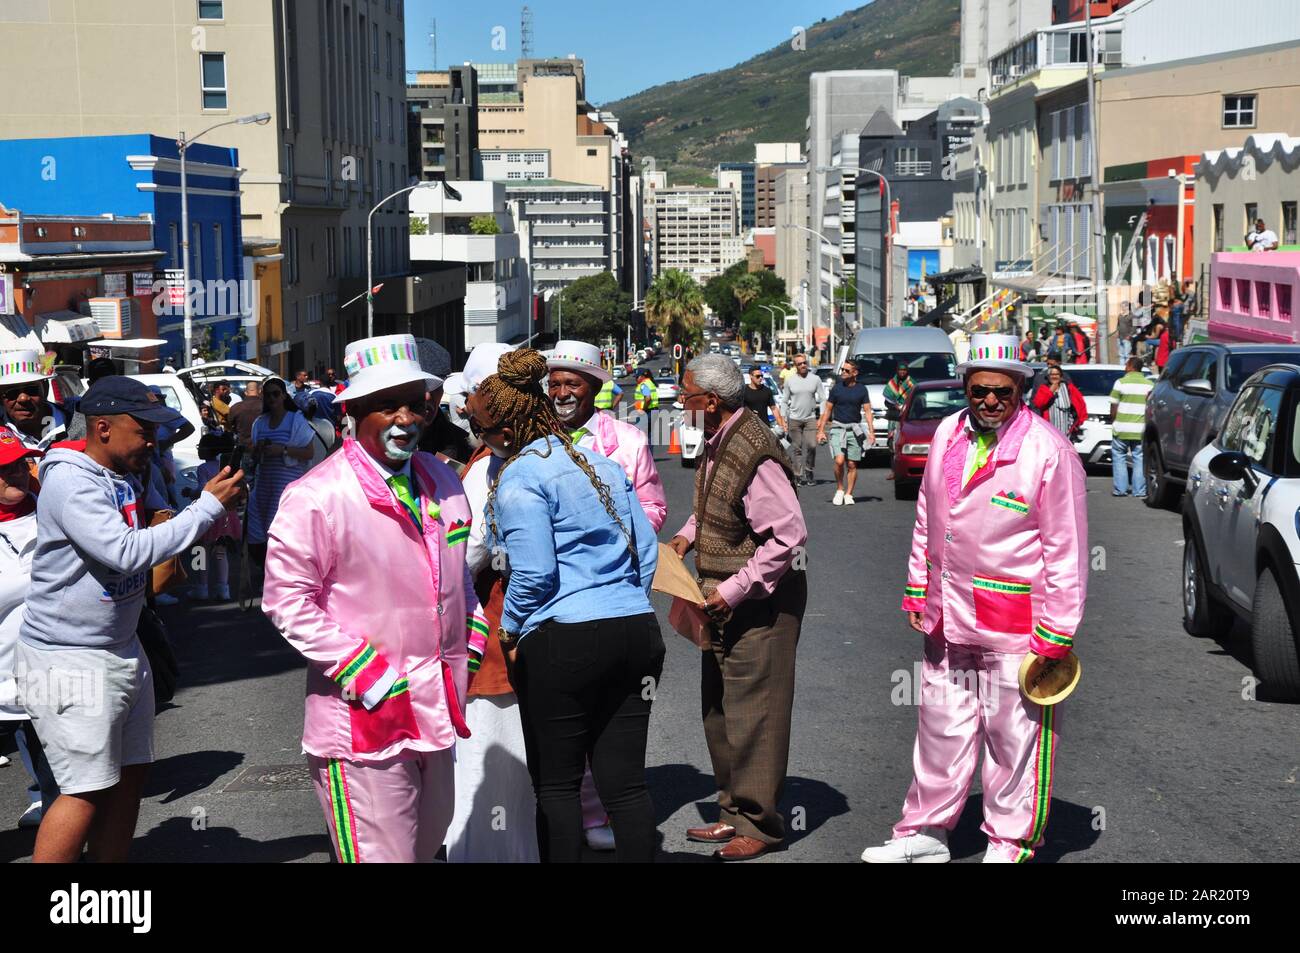 Dressed-up members of the Bo-Kaap community preparing for Prince Harry & Meghan's visit in their uniquely colourful and exuberant way. Stock Photo